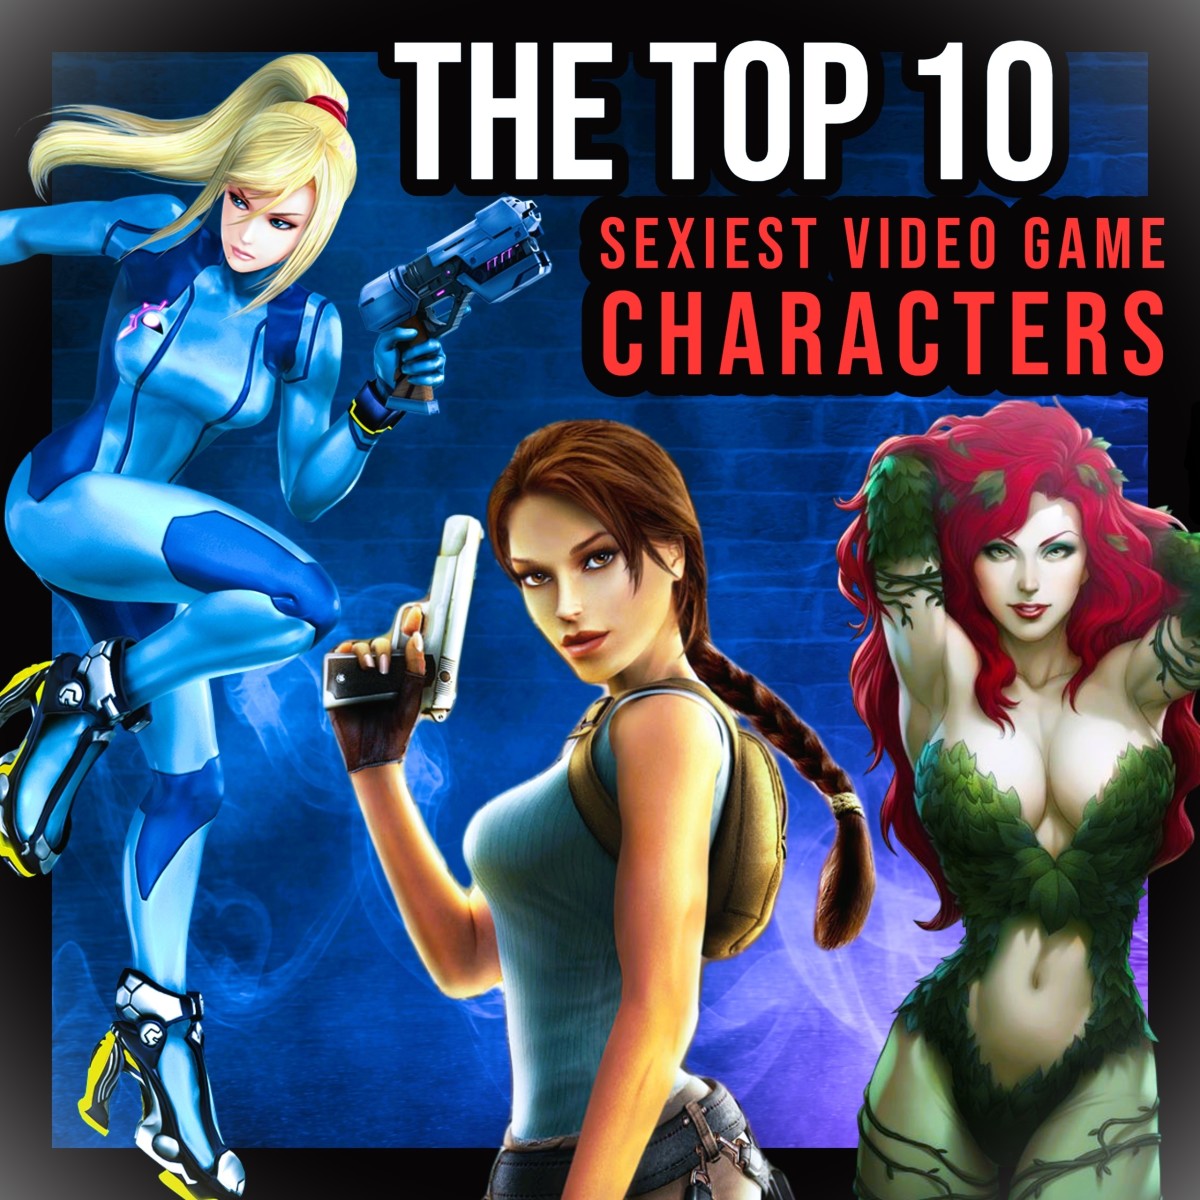 The Top 10 Sexiest Video Game Characters